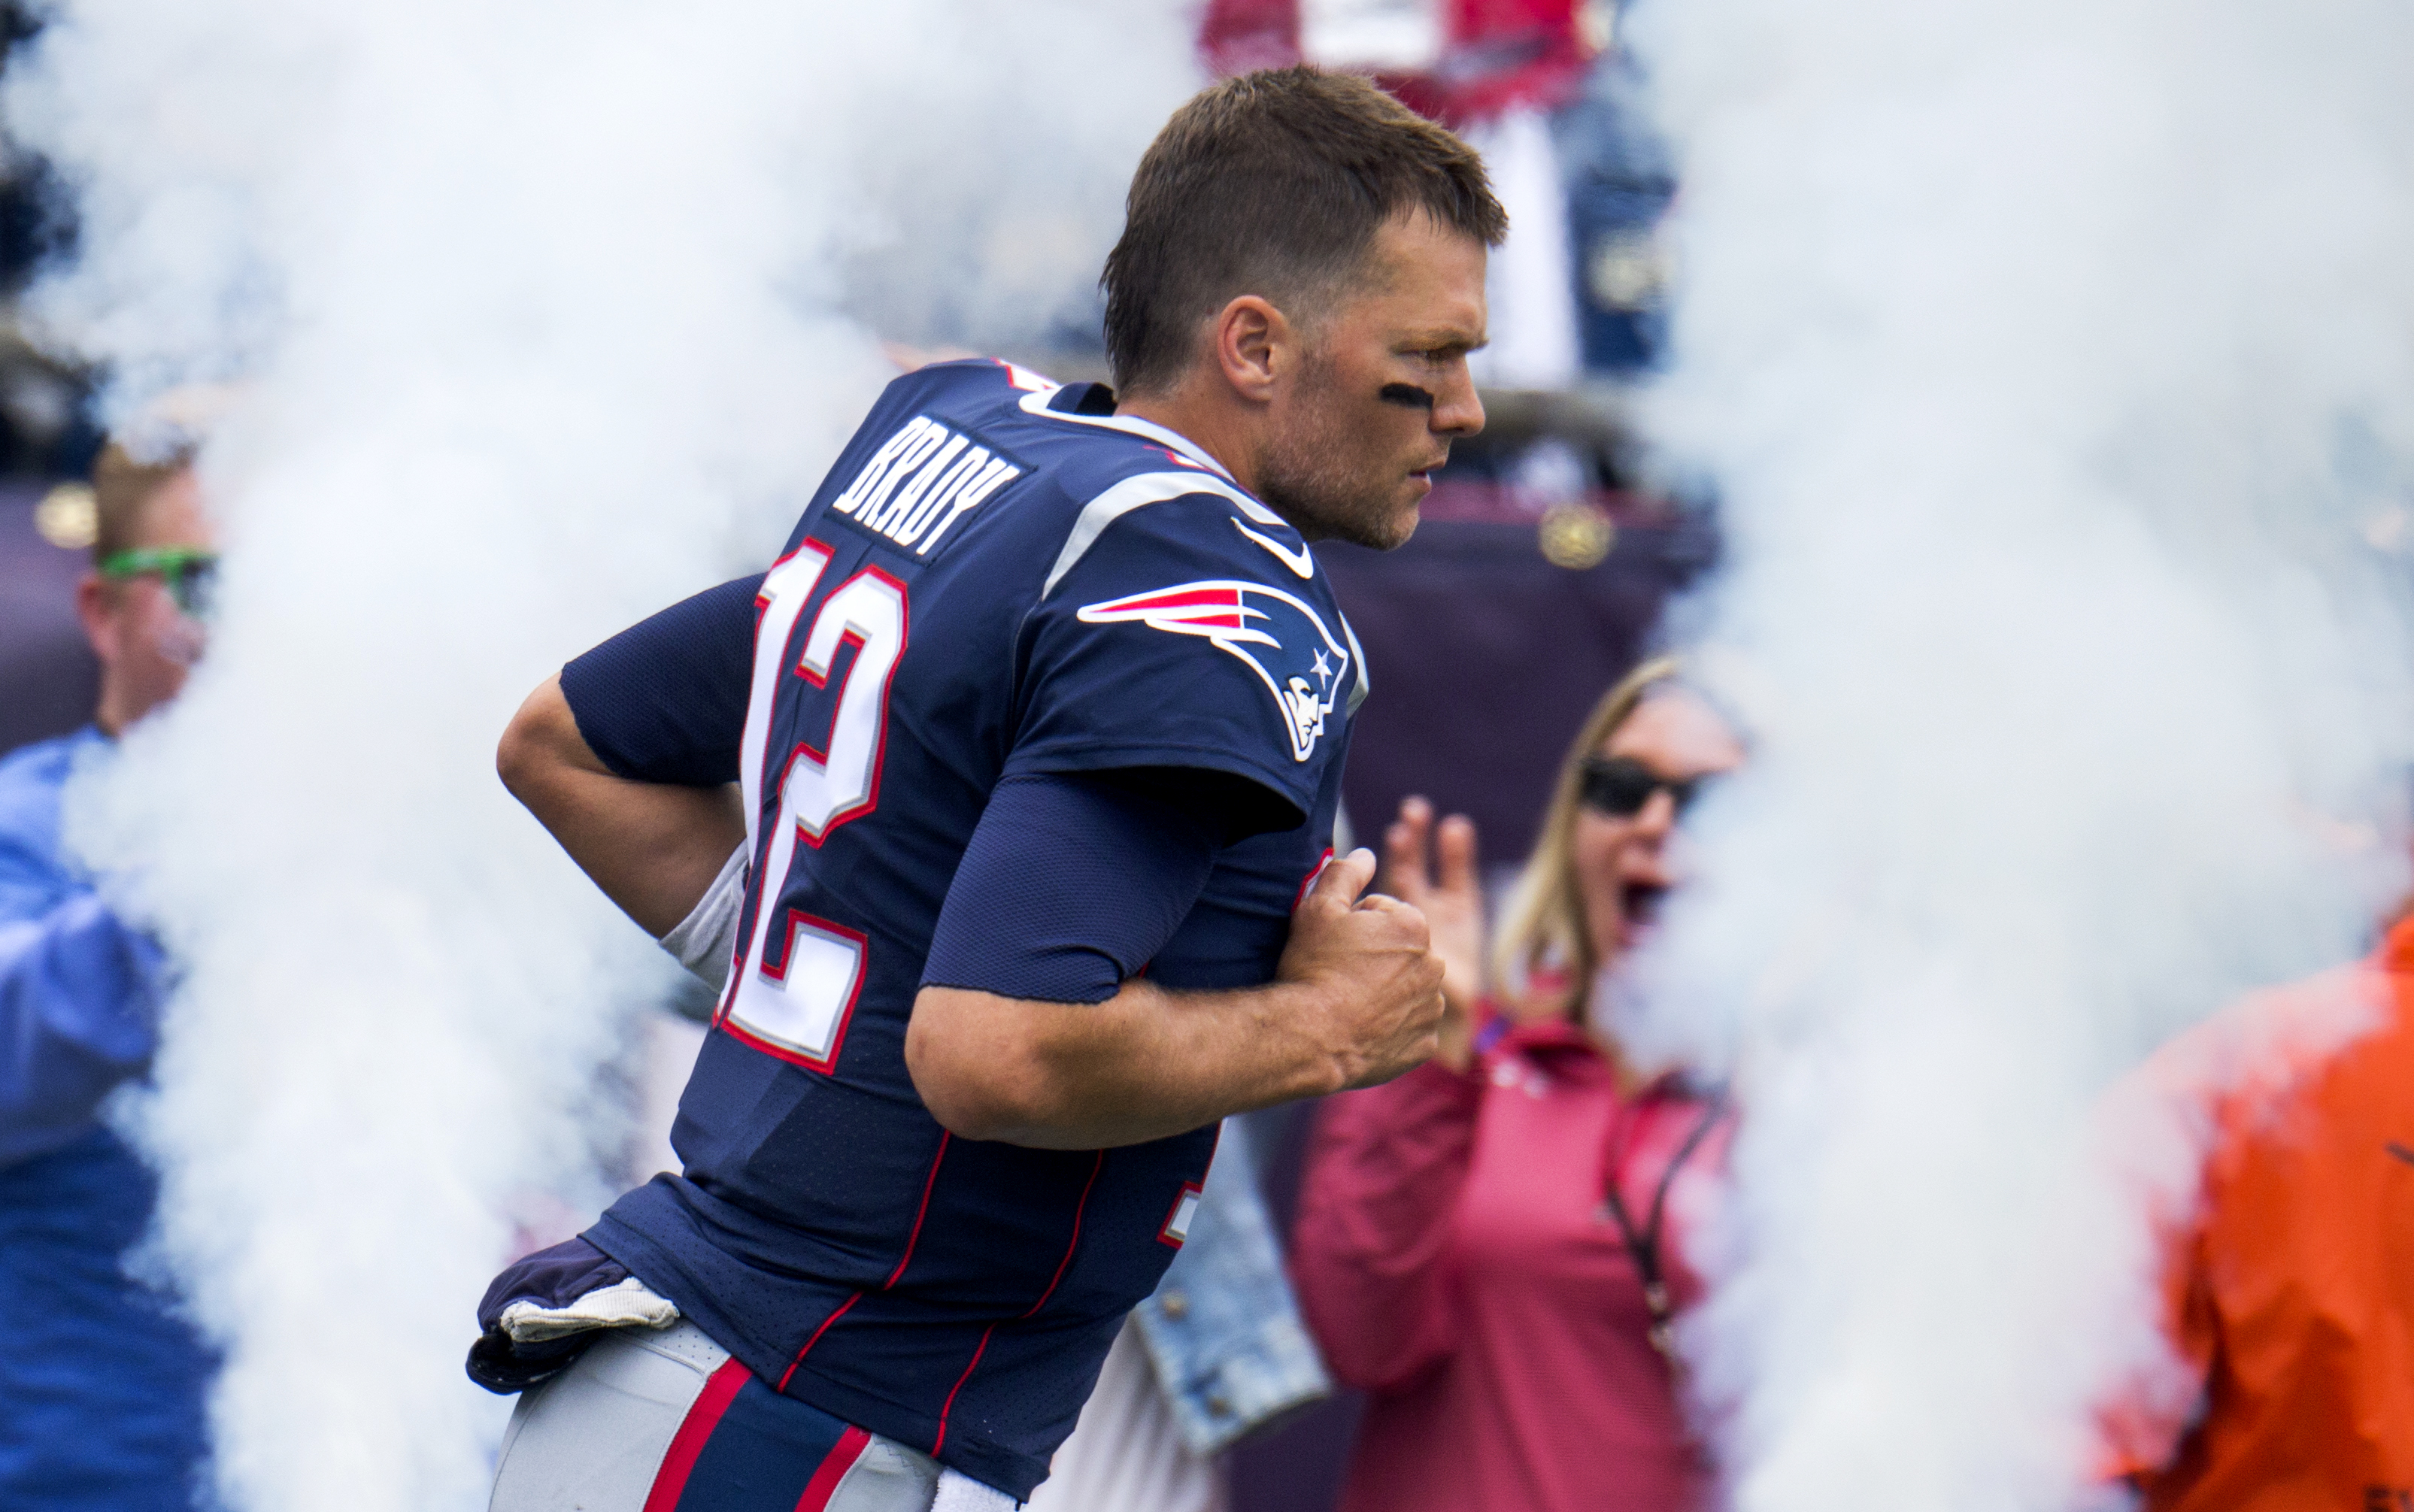 Photos: Looking back at Tom Brady's 22-year NFL career - The